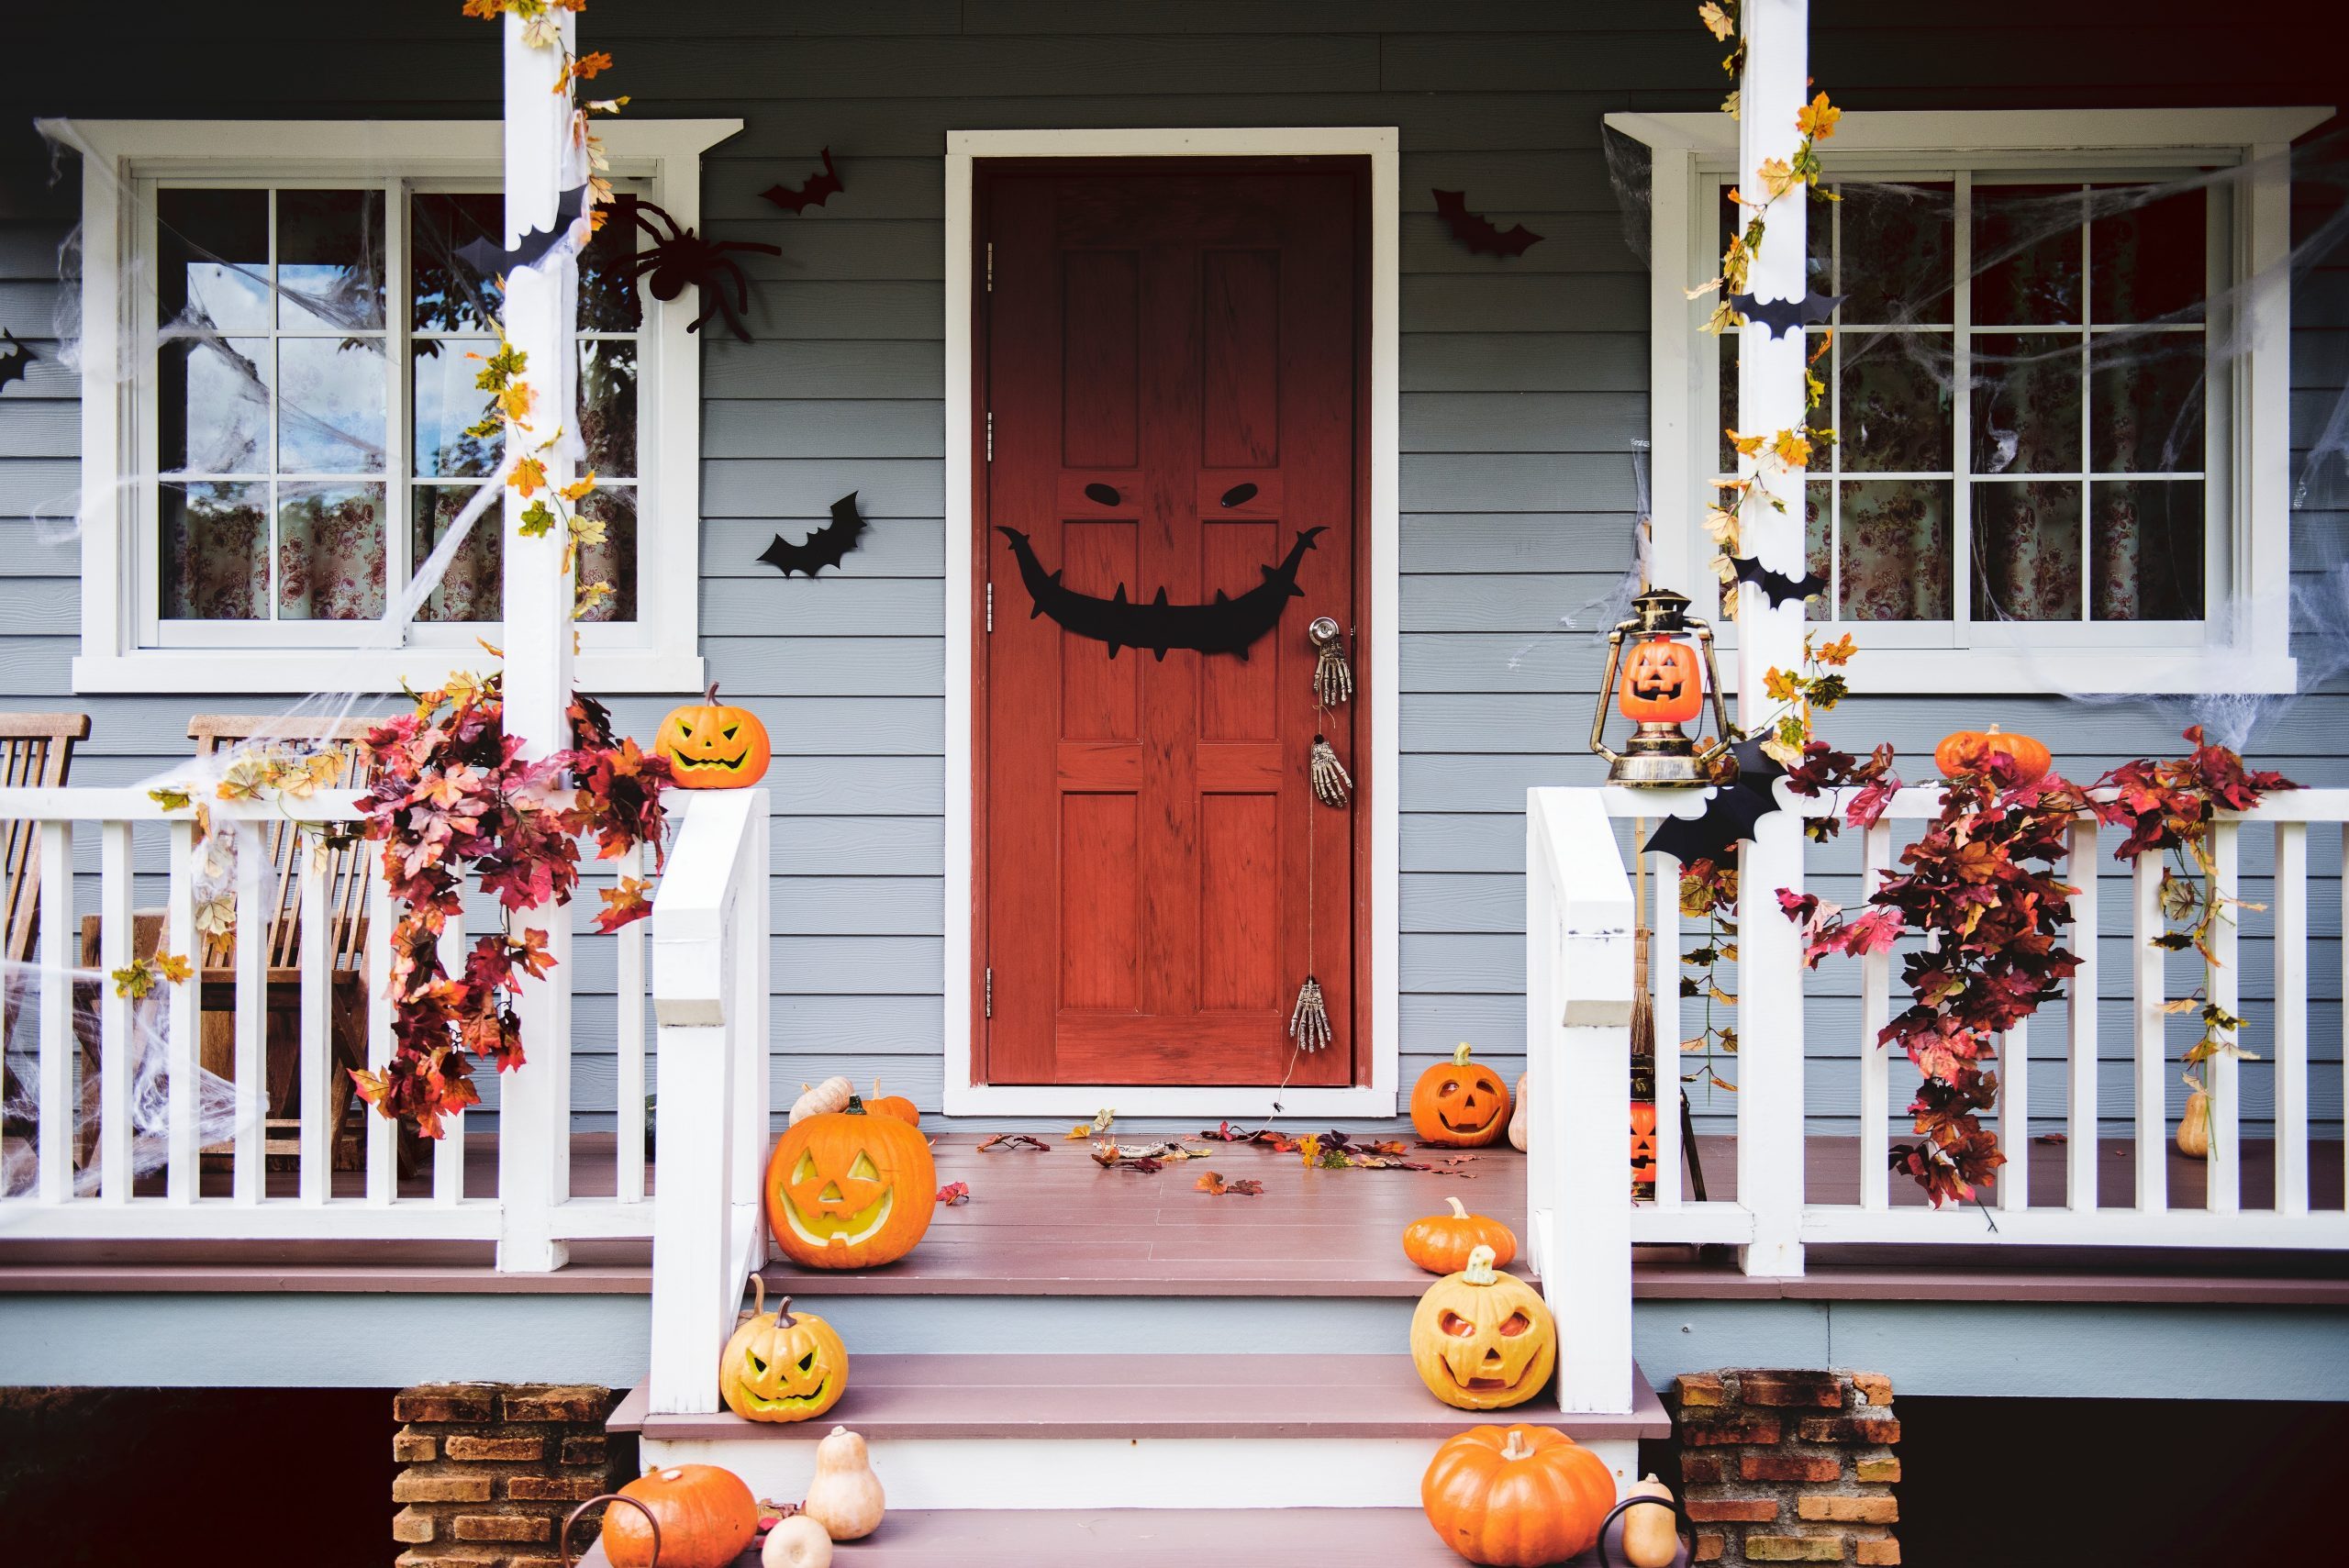 What Is Halloween and How Is It Celebrated? | Reader's digest